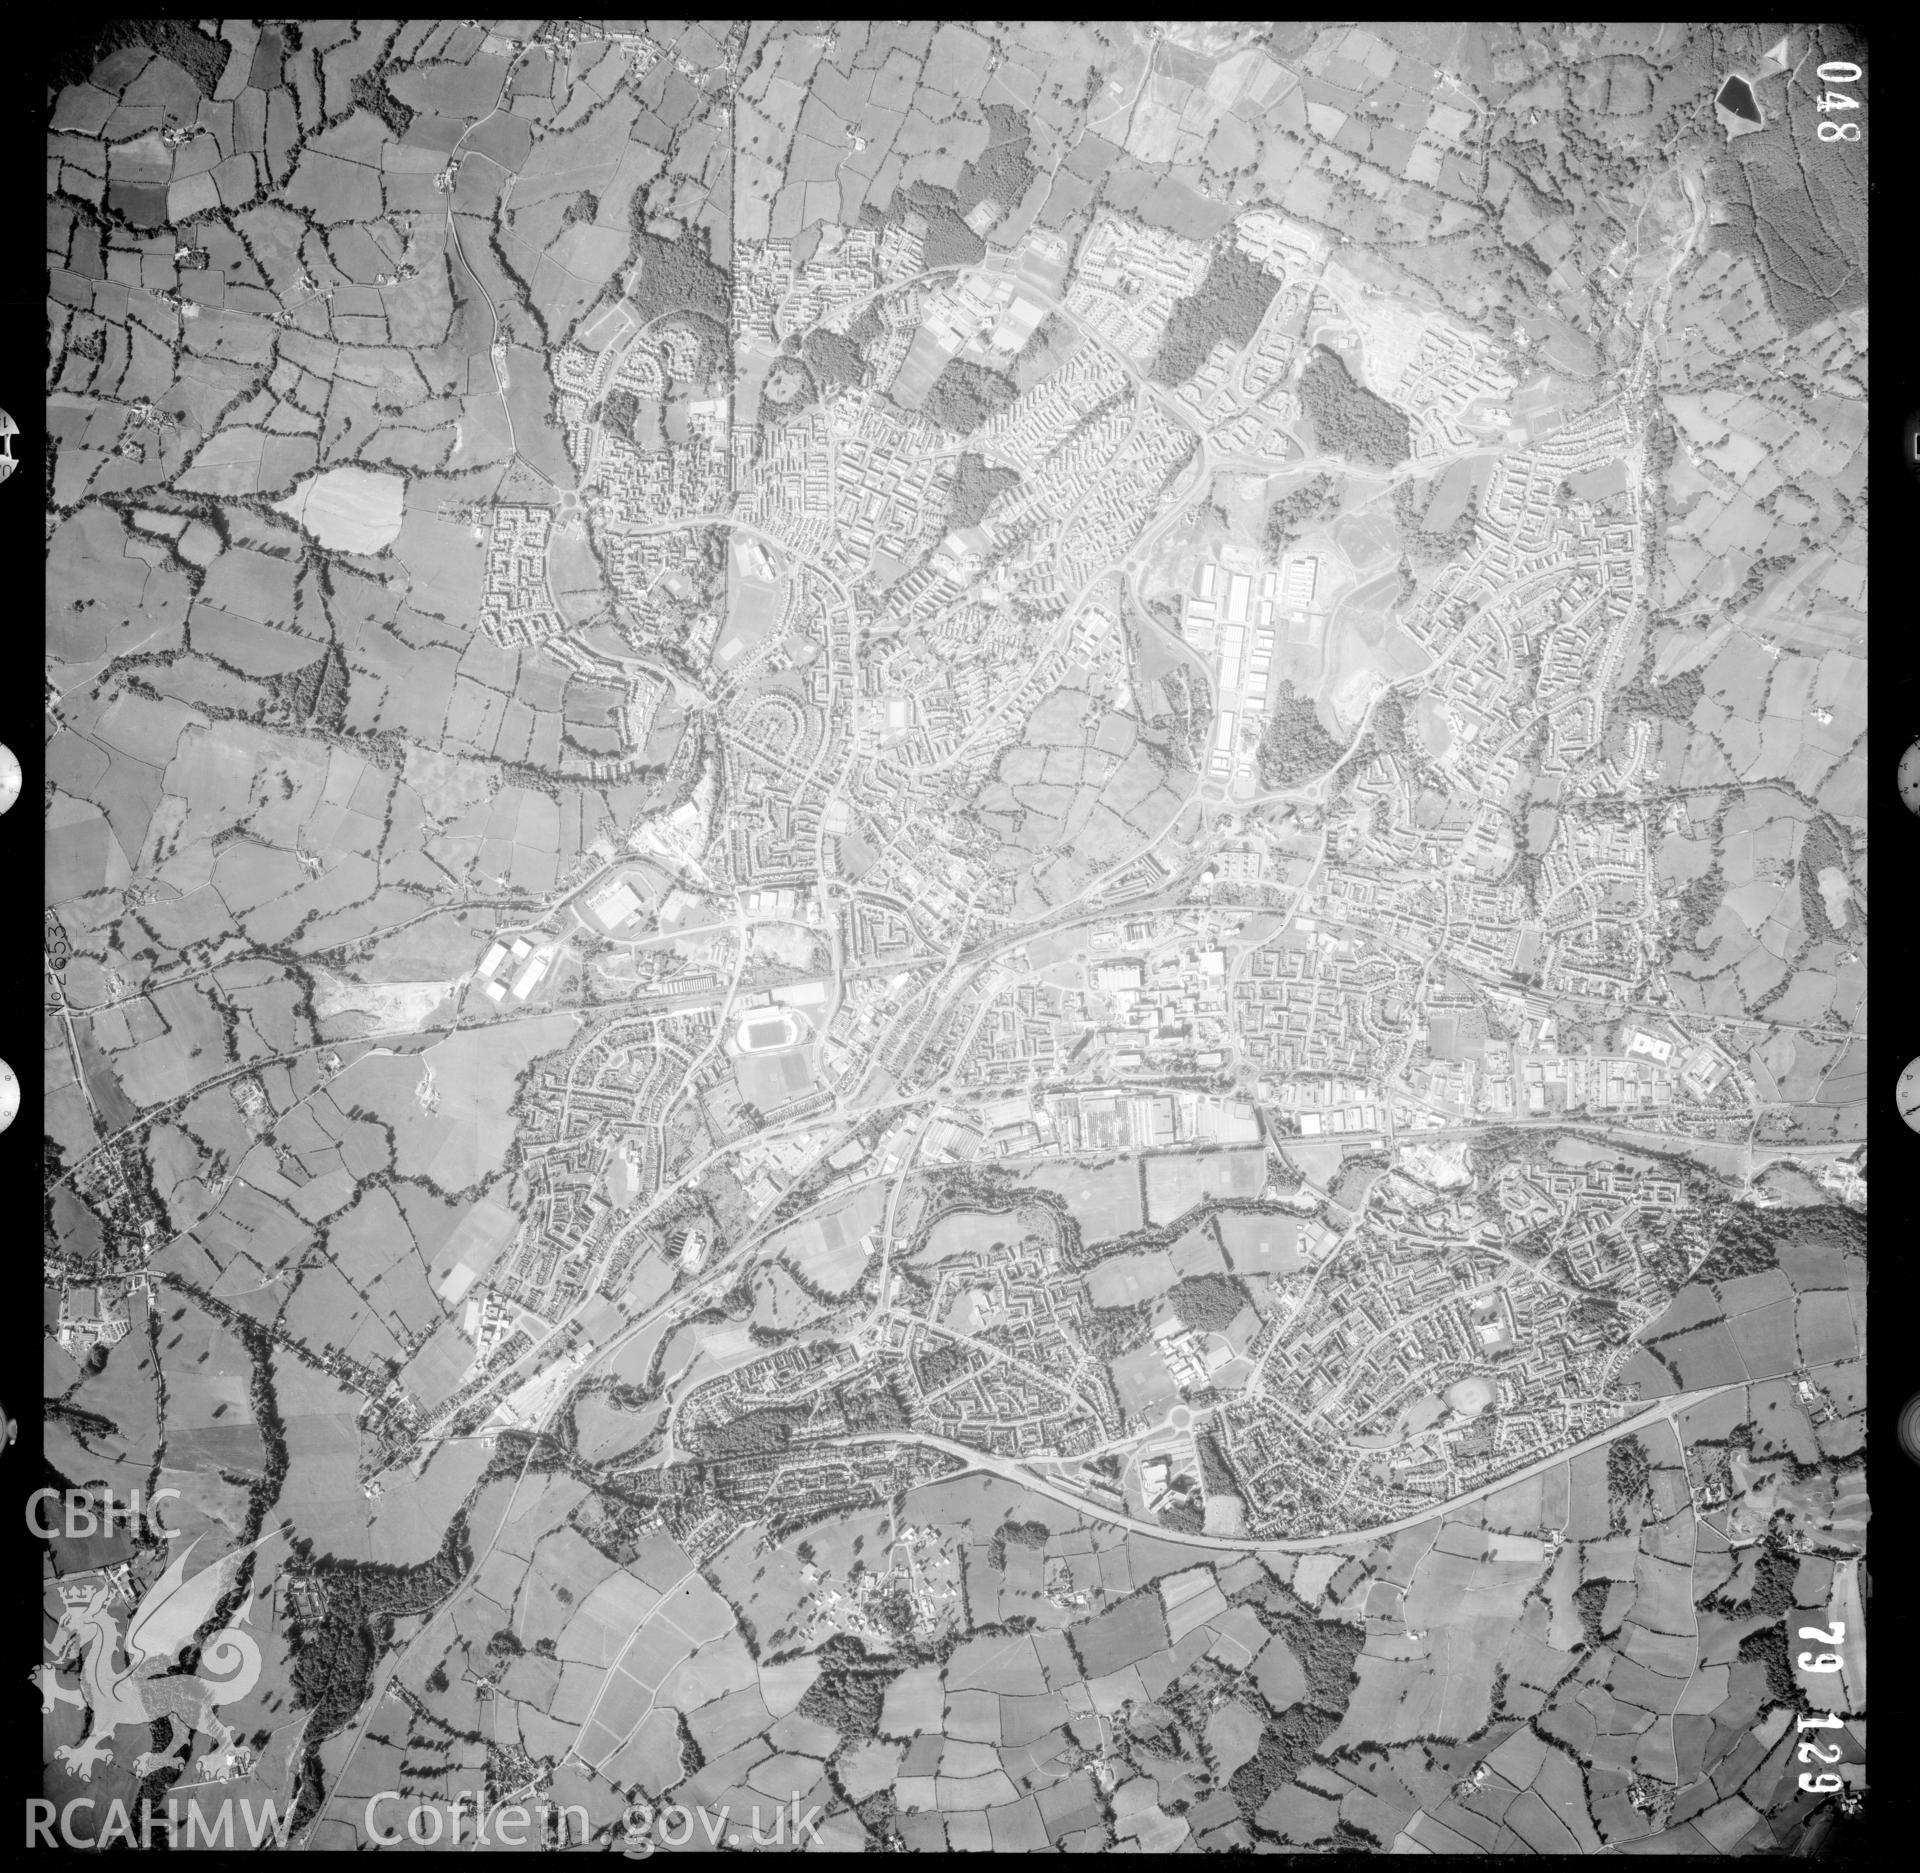 Aerial photograph of Cwmbran, taken in 1979. Included as part of Archaeology Wales' desk based assessment of former Llantarnam Community Primary School, Croeswen, Oakfield, Cwmbran, conducted in 2017.